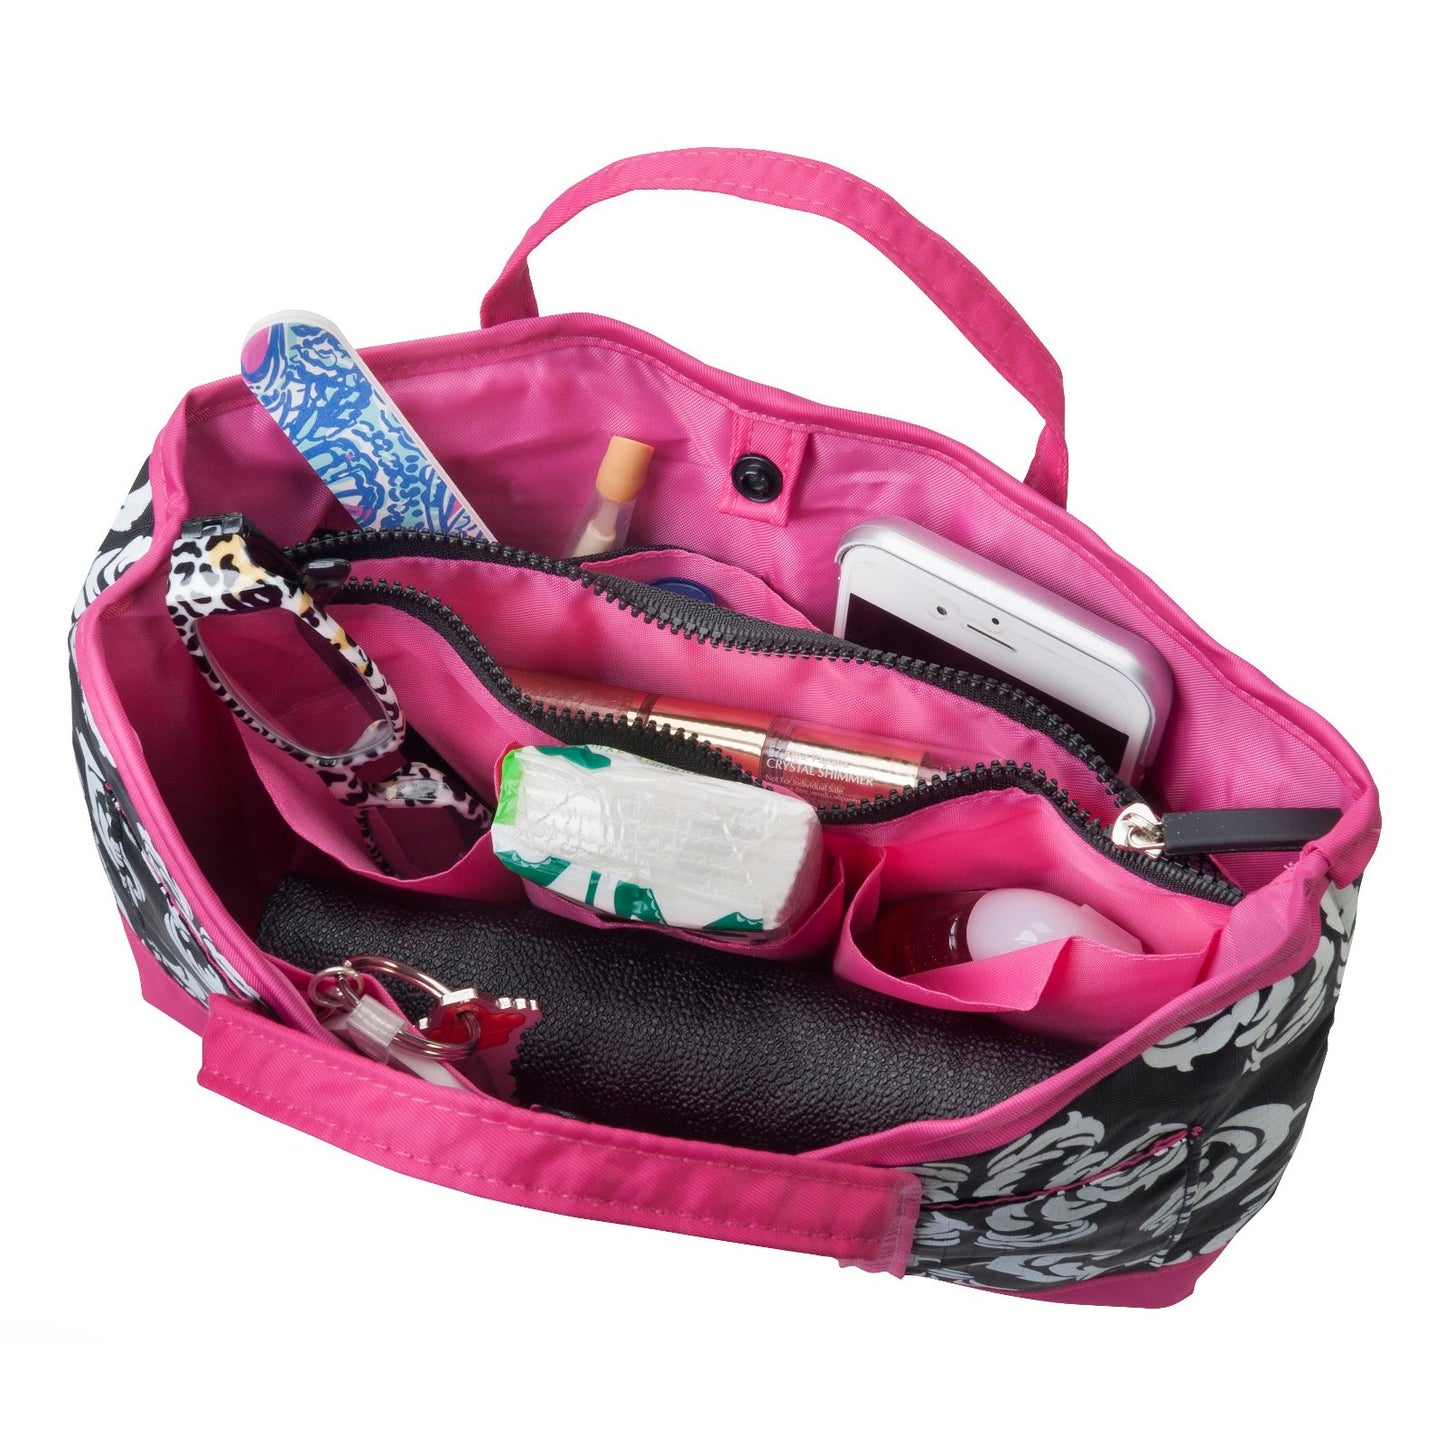 Compact Dual Handled Zippered Accessory Organizer - Color - Damask with Pink